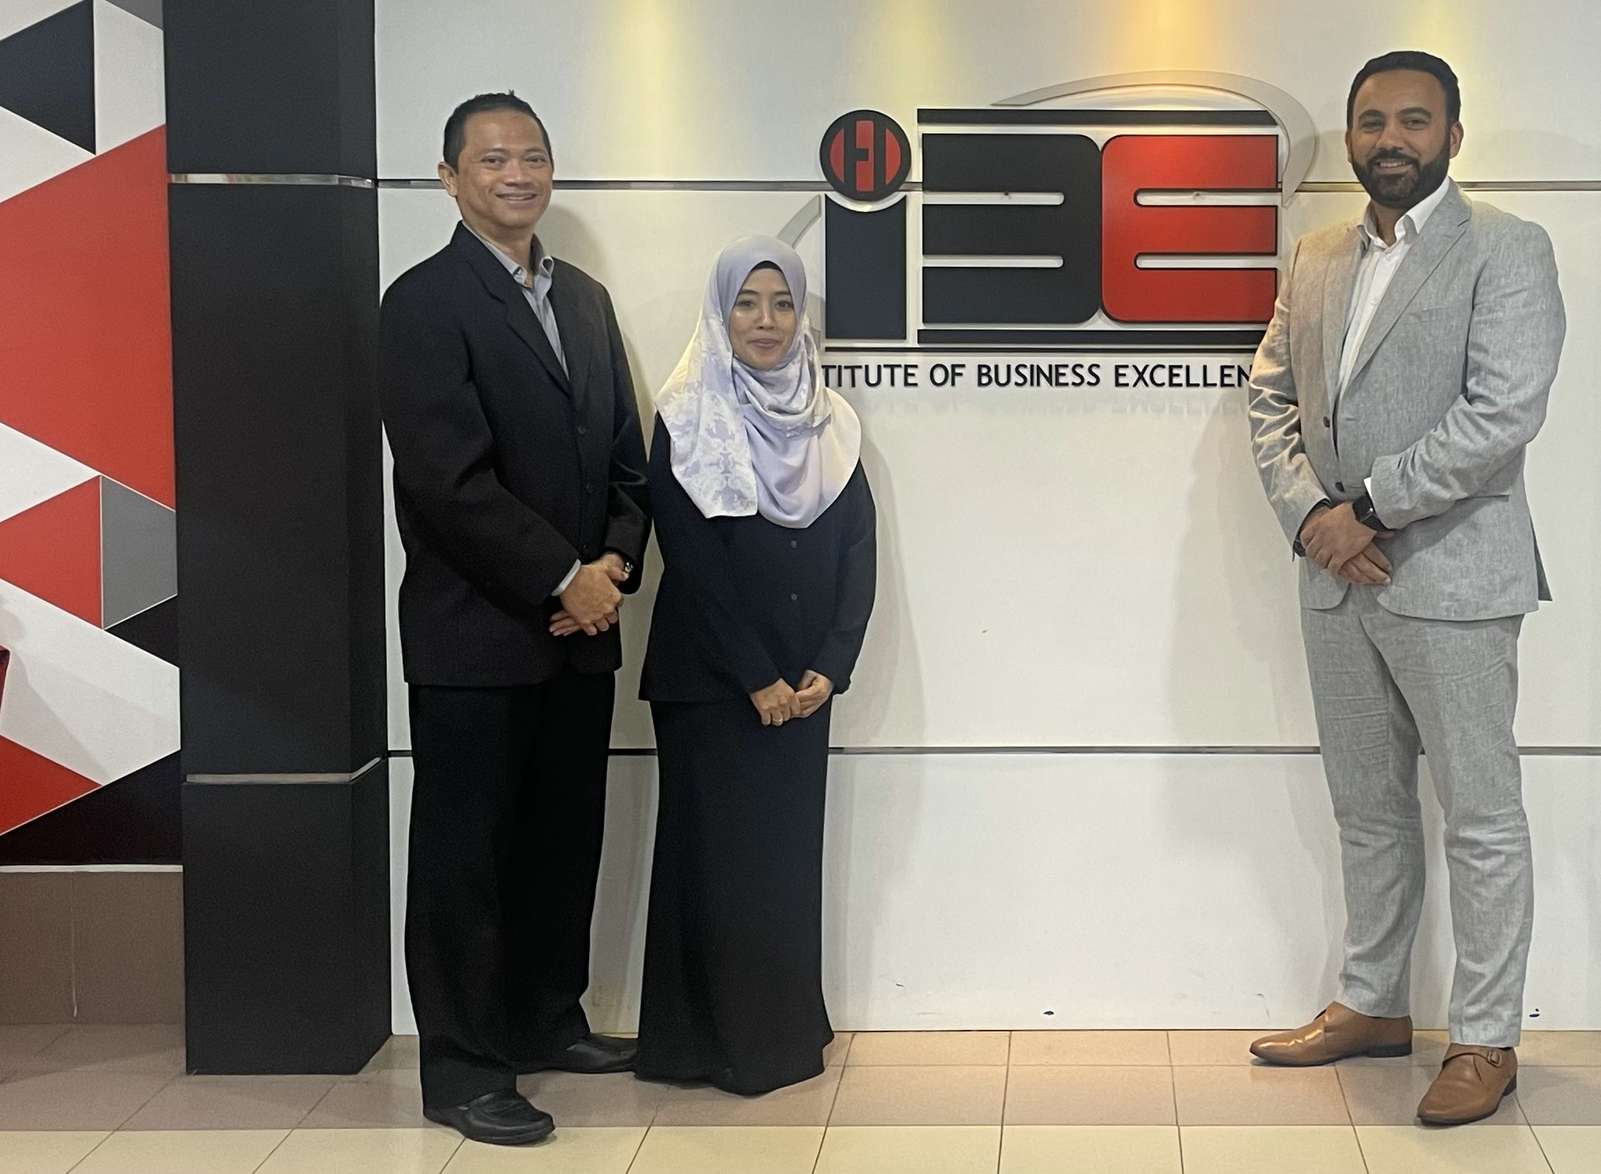 Partners from ChangeSchool, UiTM and the University of Suffolk standing by a sign that says Institute of Business Excellence